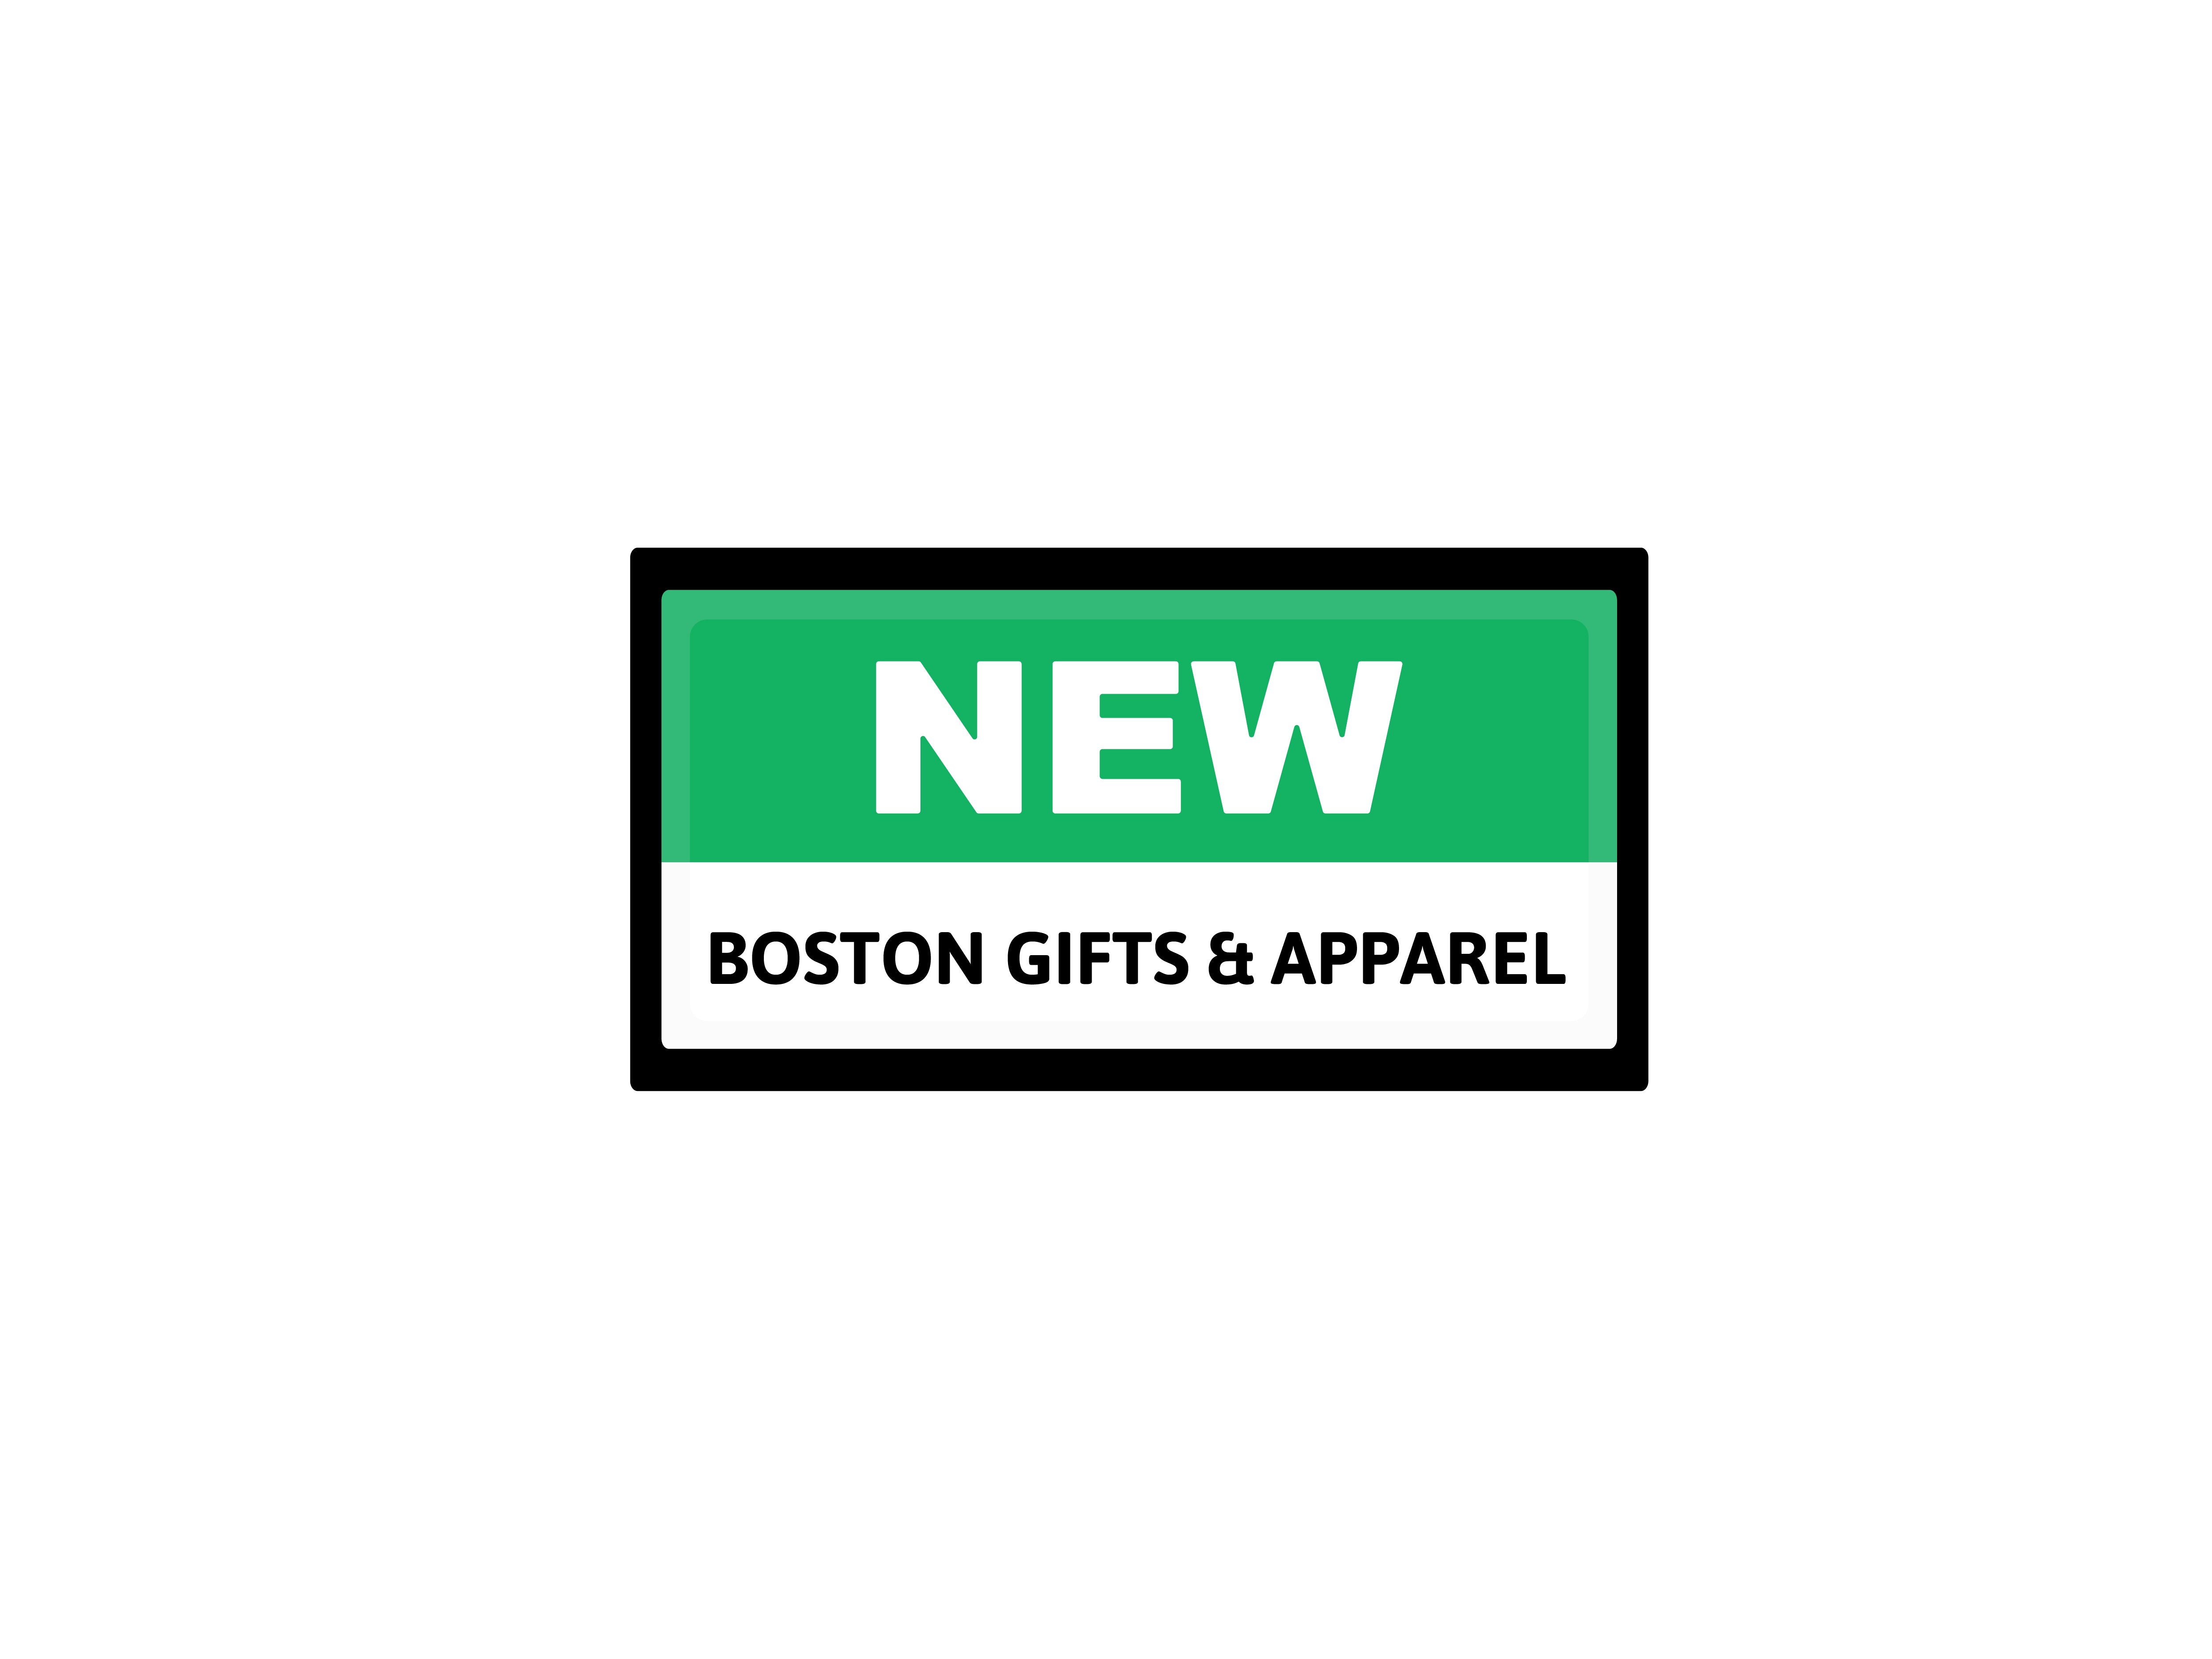 Newly introduced Boston apparel and MBTA gifts